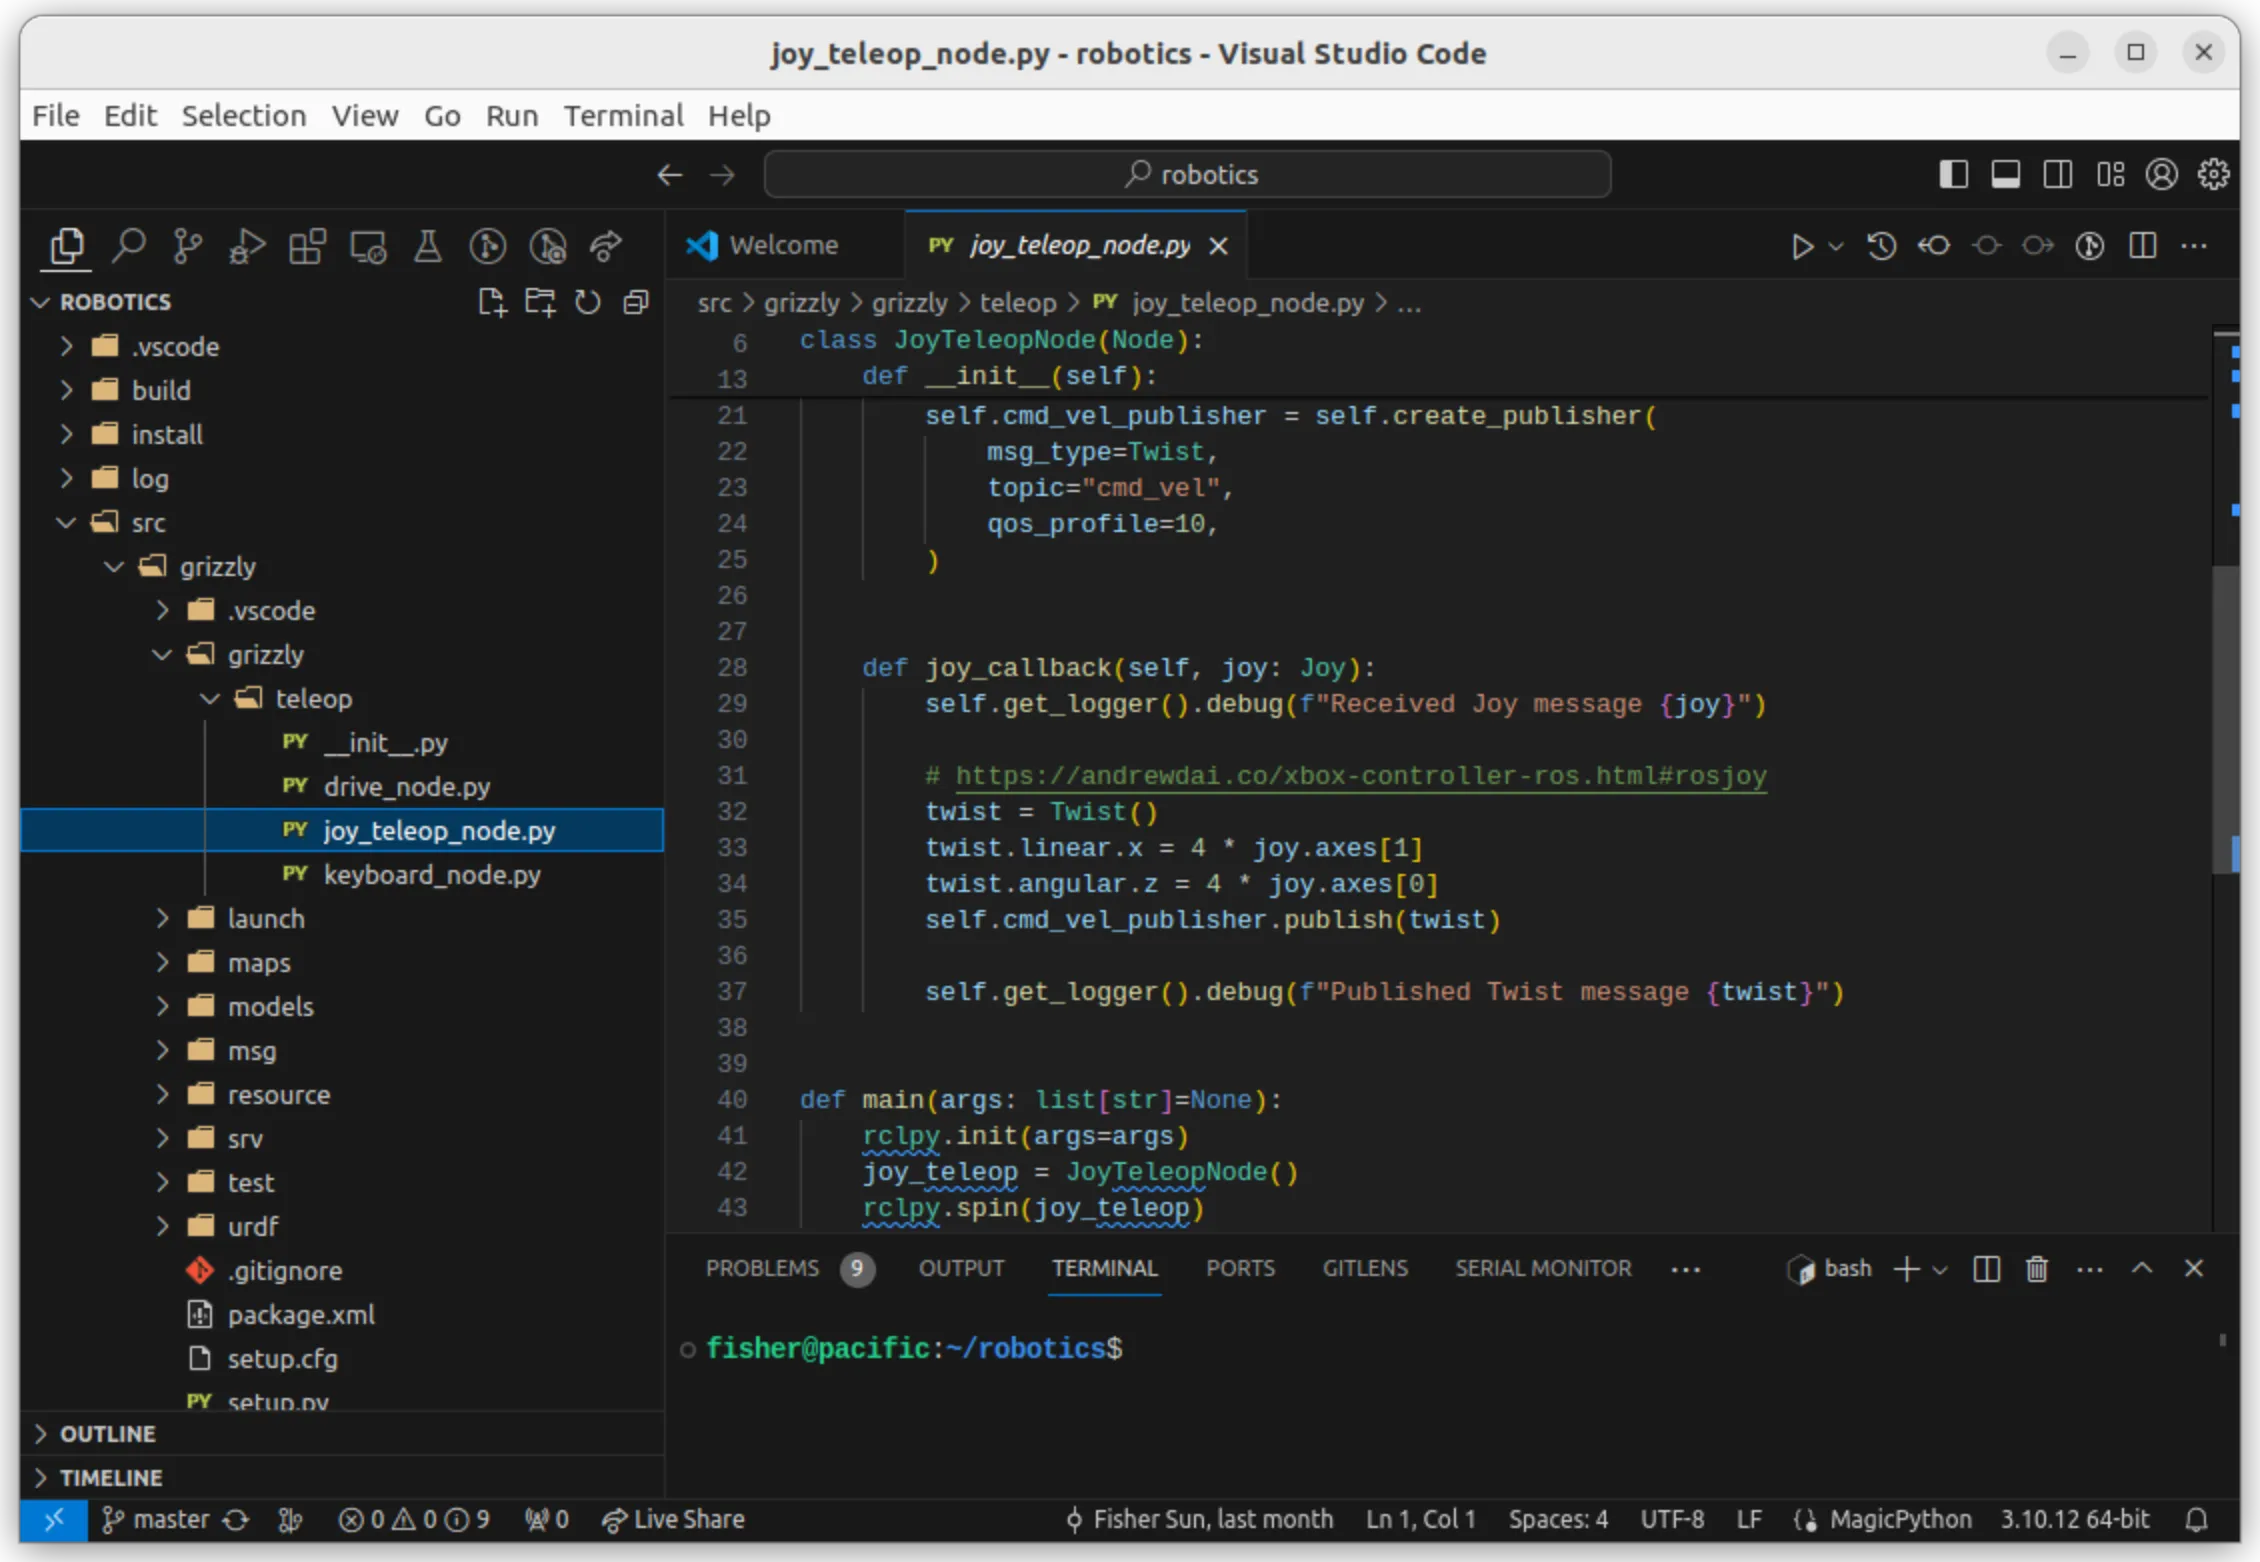 Image of VSCode before applying configuration